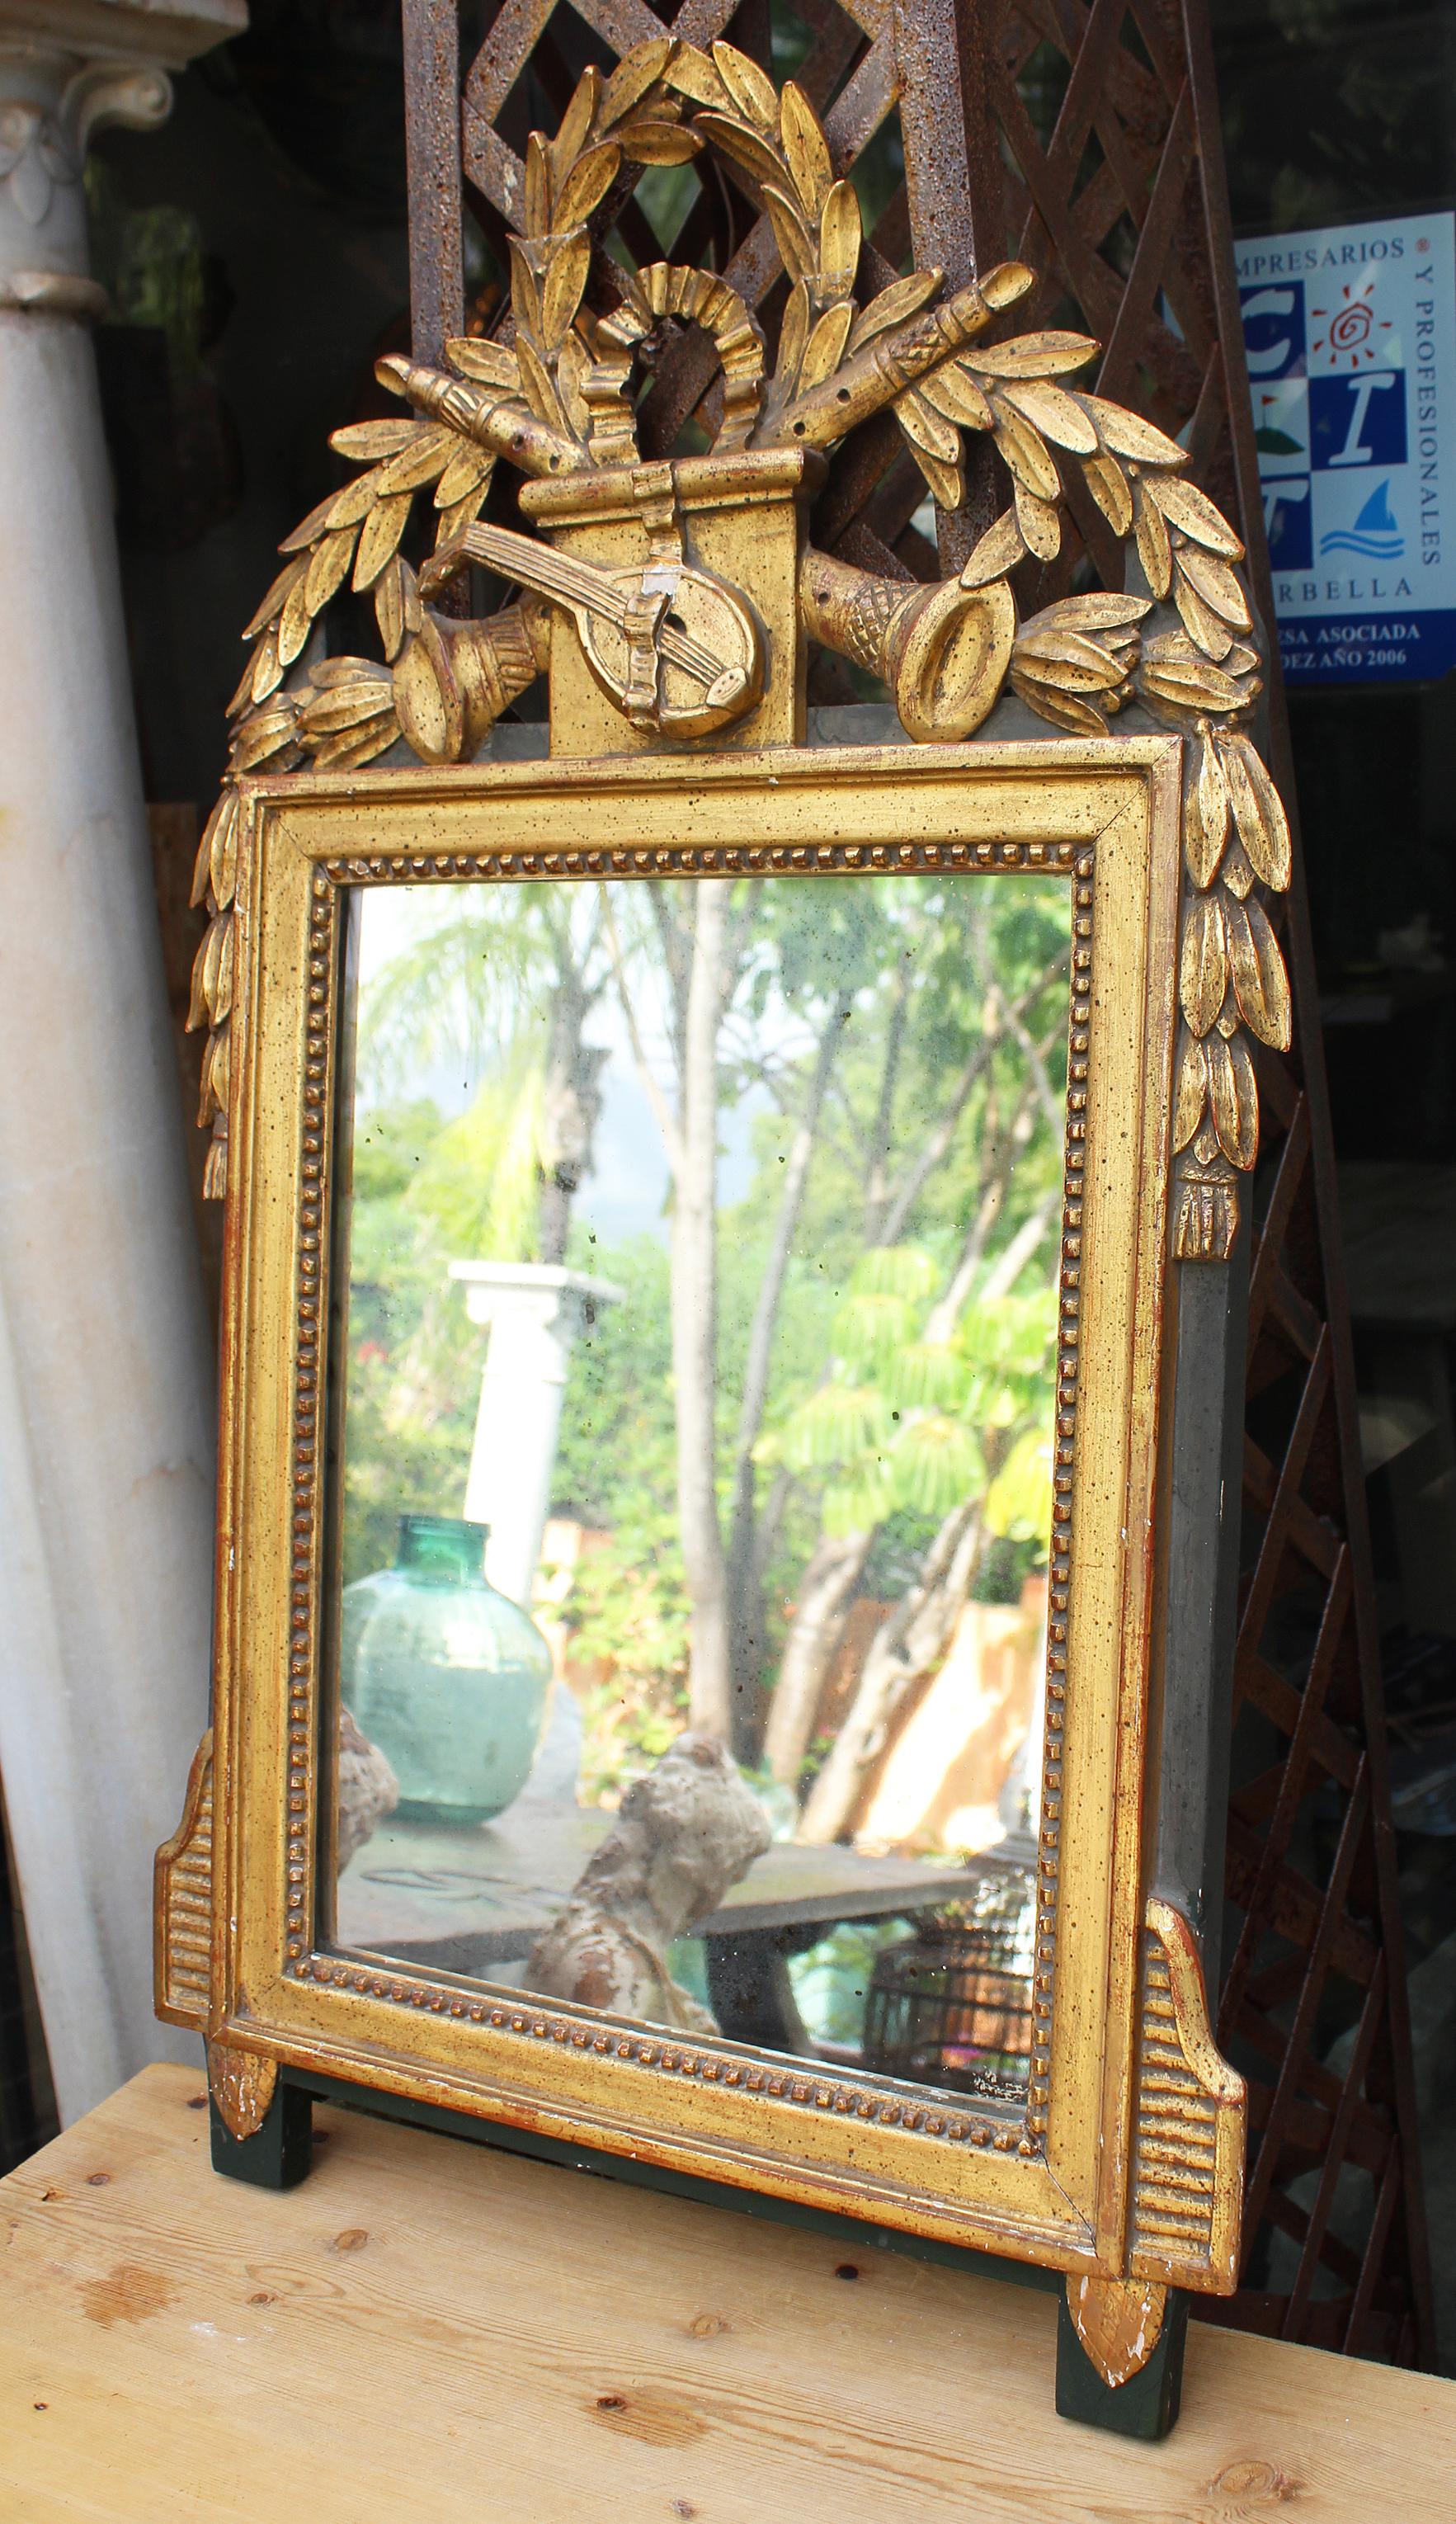 19th century French gilded hand carved wooden mirror topped with a guitar, flutes and profusely decorated with bay leaf garlands.

 